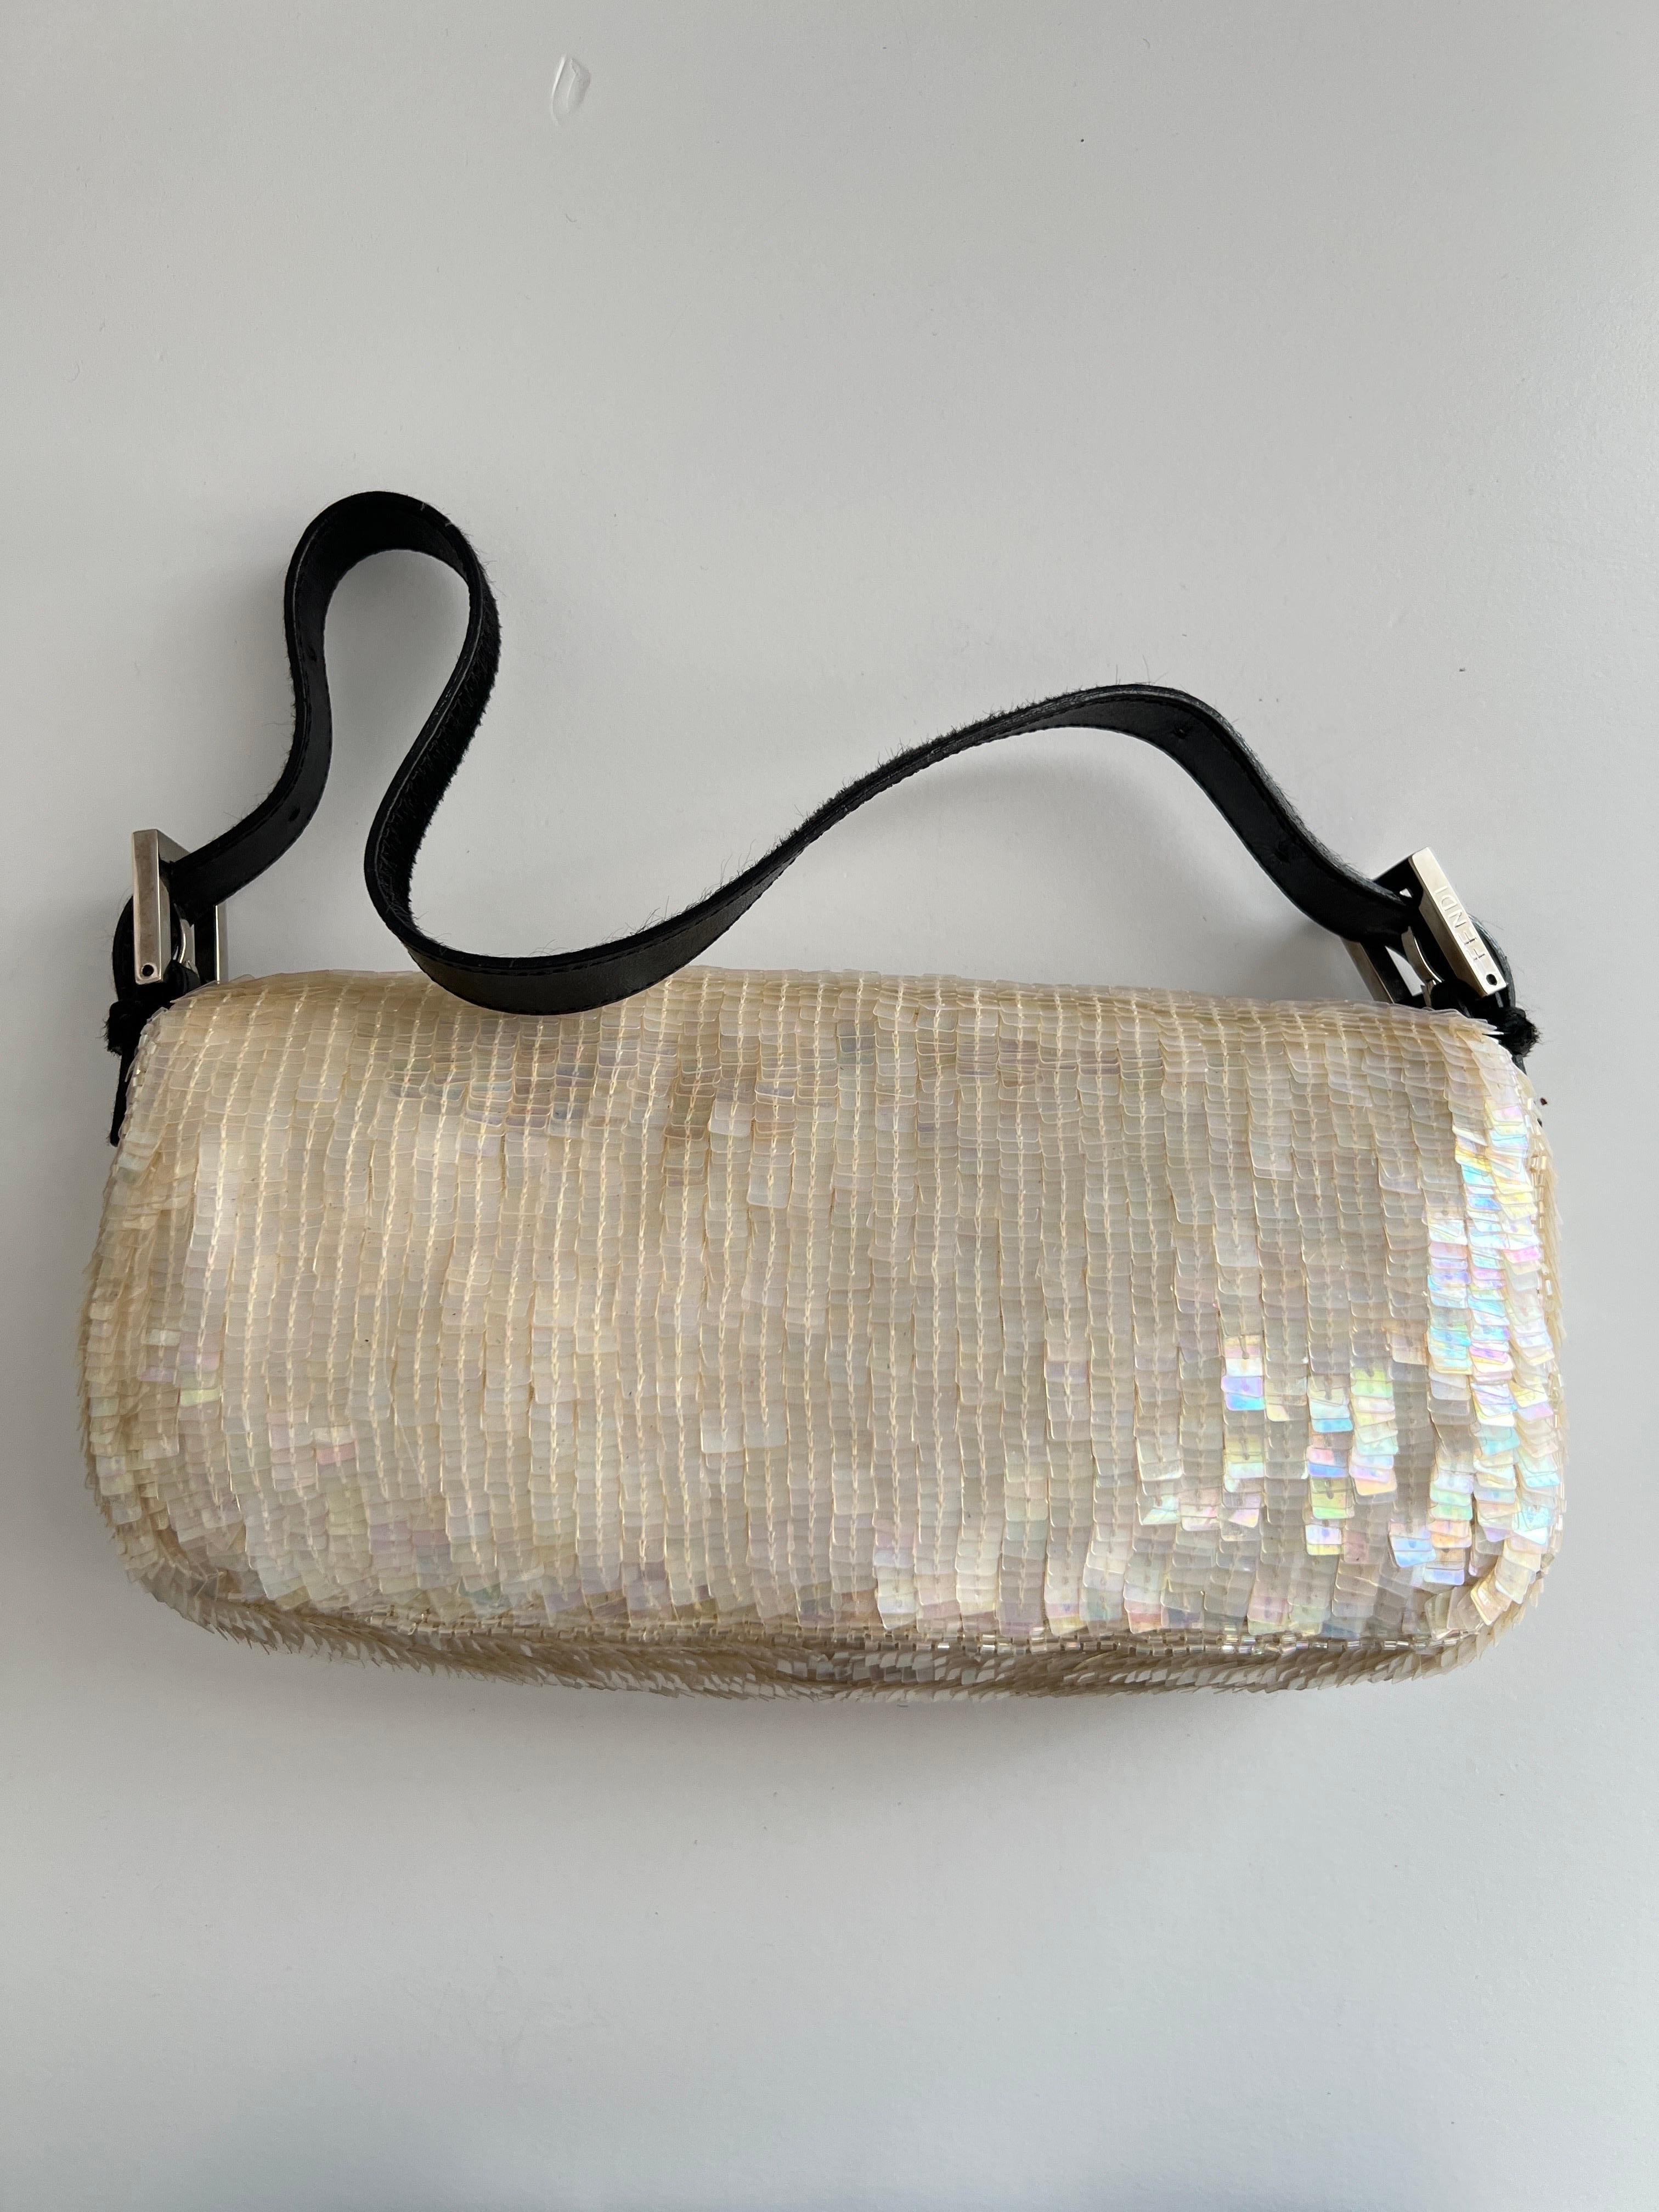 Very rare iridescent pearl color sequin baguette from 1997-2000
Very good vintage condition
There are no noticeable stains or flaws
Minor scratches on the hardware
Black pony hair strap and closure part

